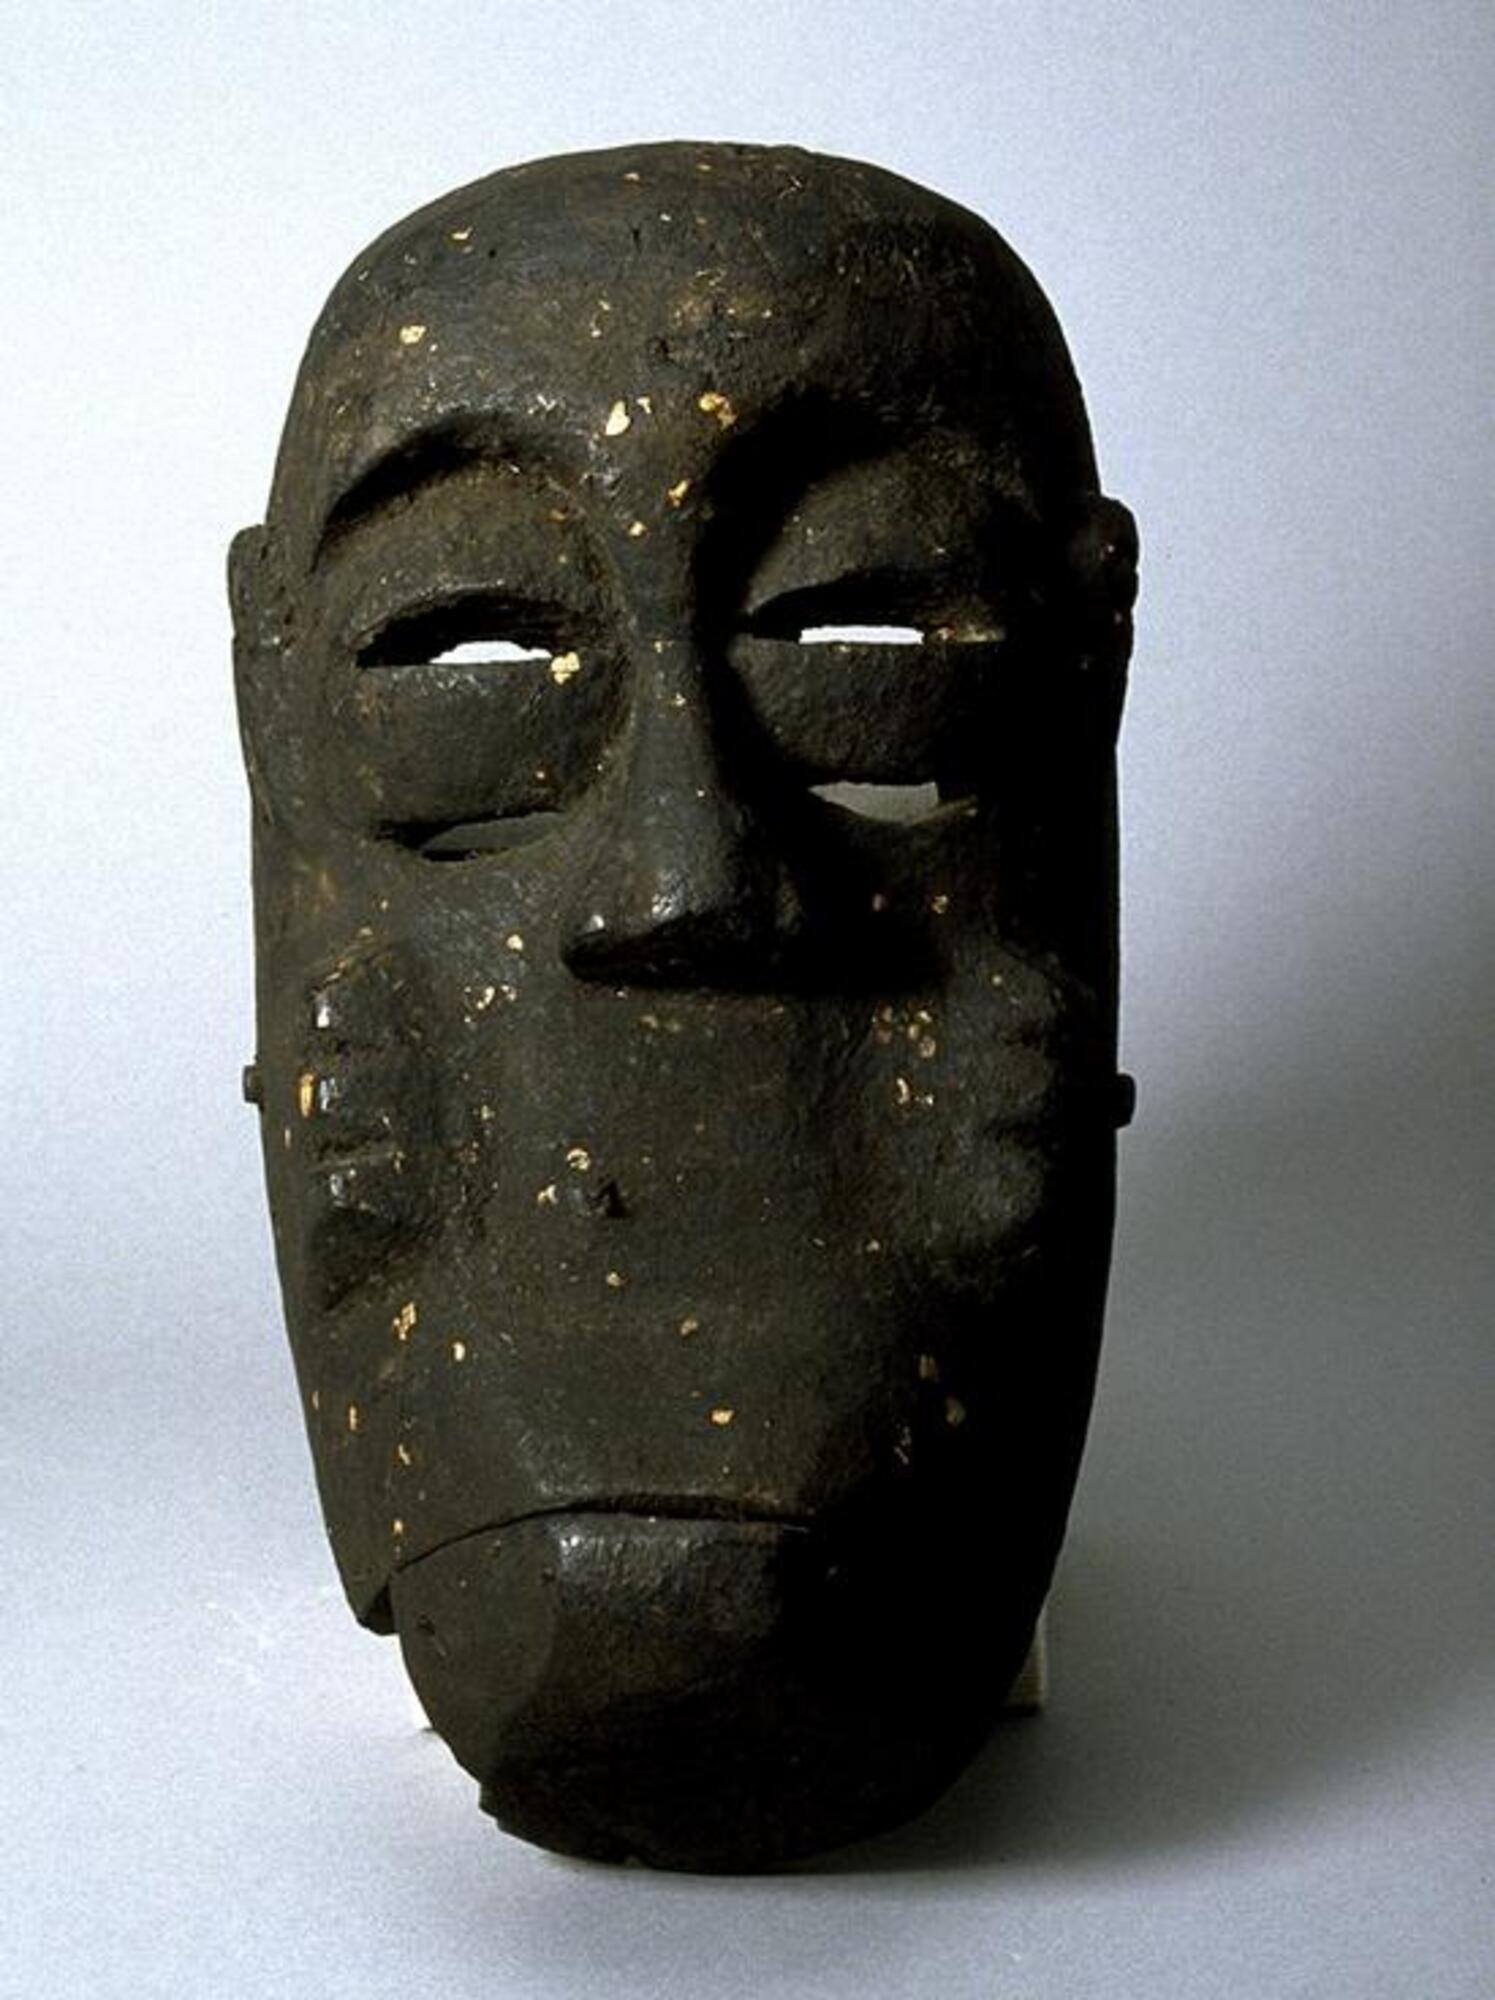 Large, ovoid mask with a dark patina. The forehead of the face is raised, sloping down to a short, broad nose. The eyes are formed by two cresent shapes separated by a rectangle. On each cheek are three raised marks in a vertical line. The mouth is closed and may be moveable. 